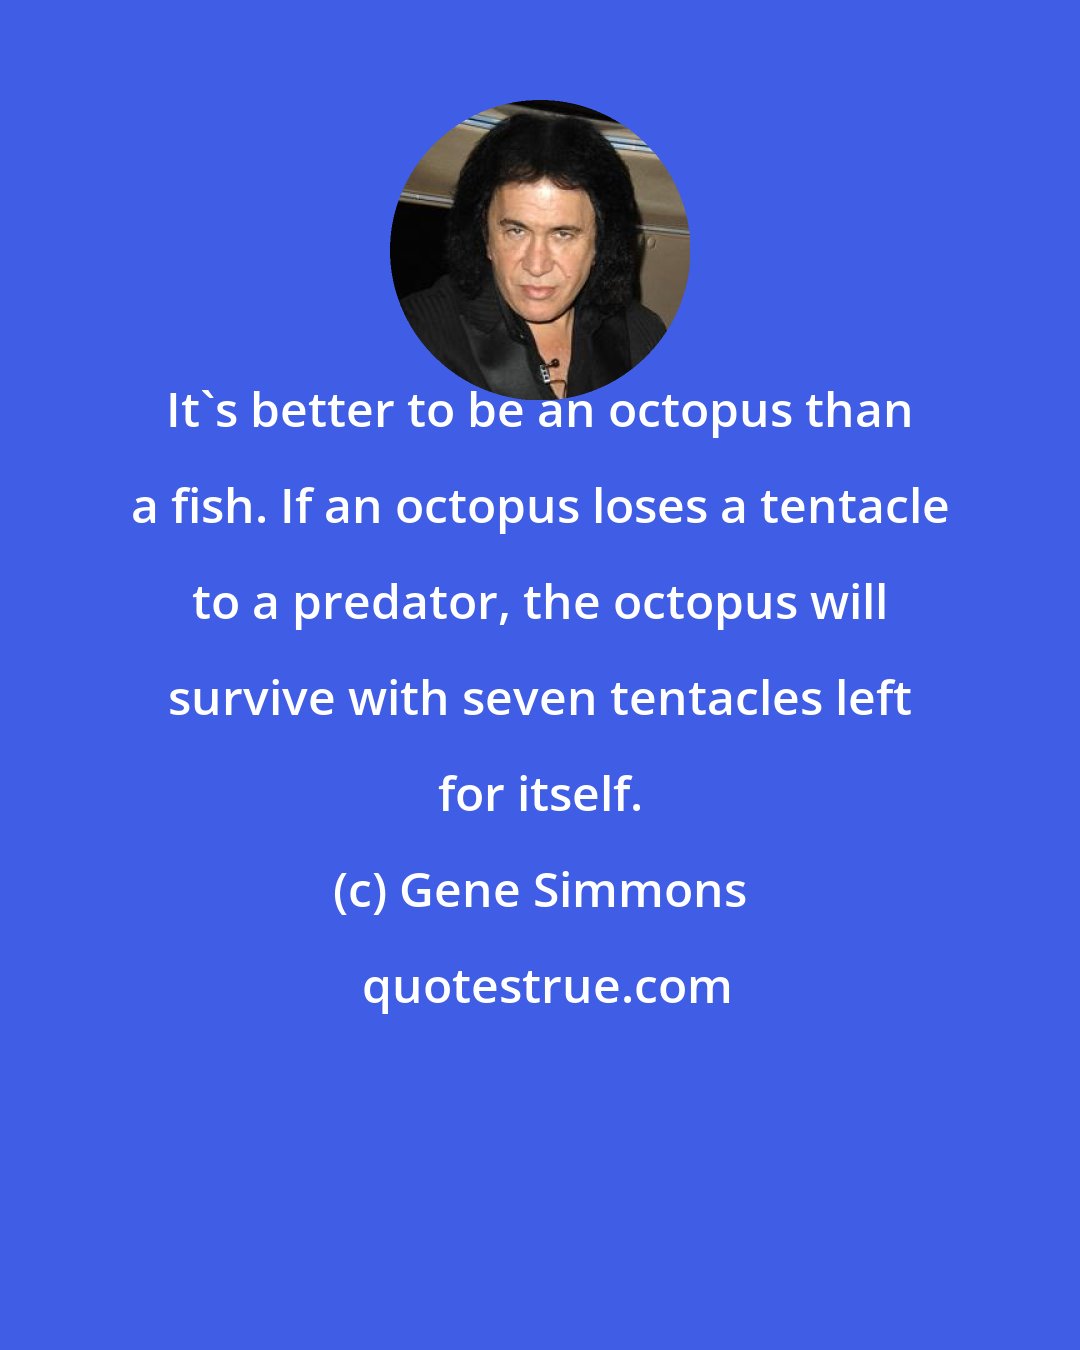 Gene Simmons: It's better to be an octopus than a fish. If an octopus loses a tentacle to a predator, the octopus will survive with seven tentacles left for itself.